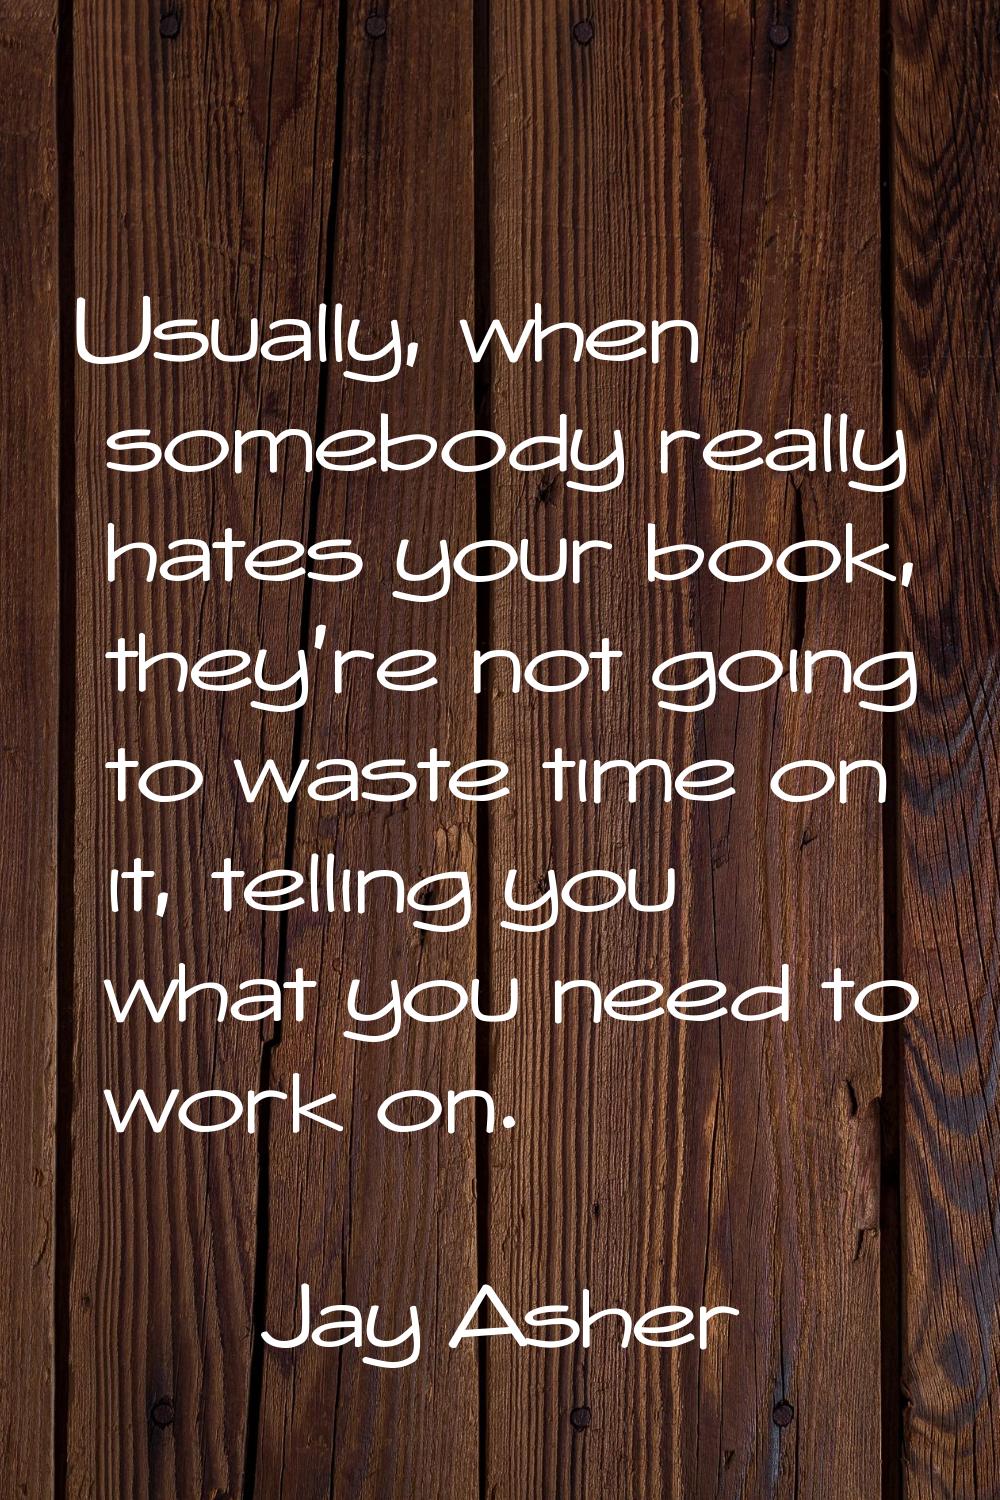 Usually, when somebody really hates your book, they're not going to waste time on it, telling you w